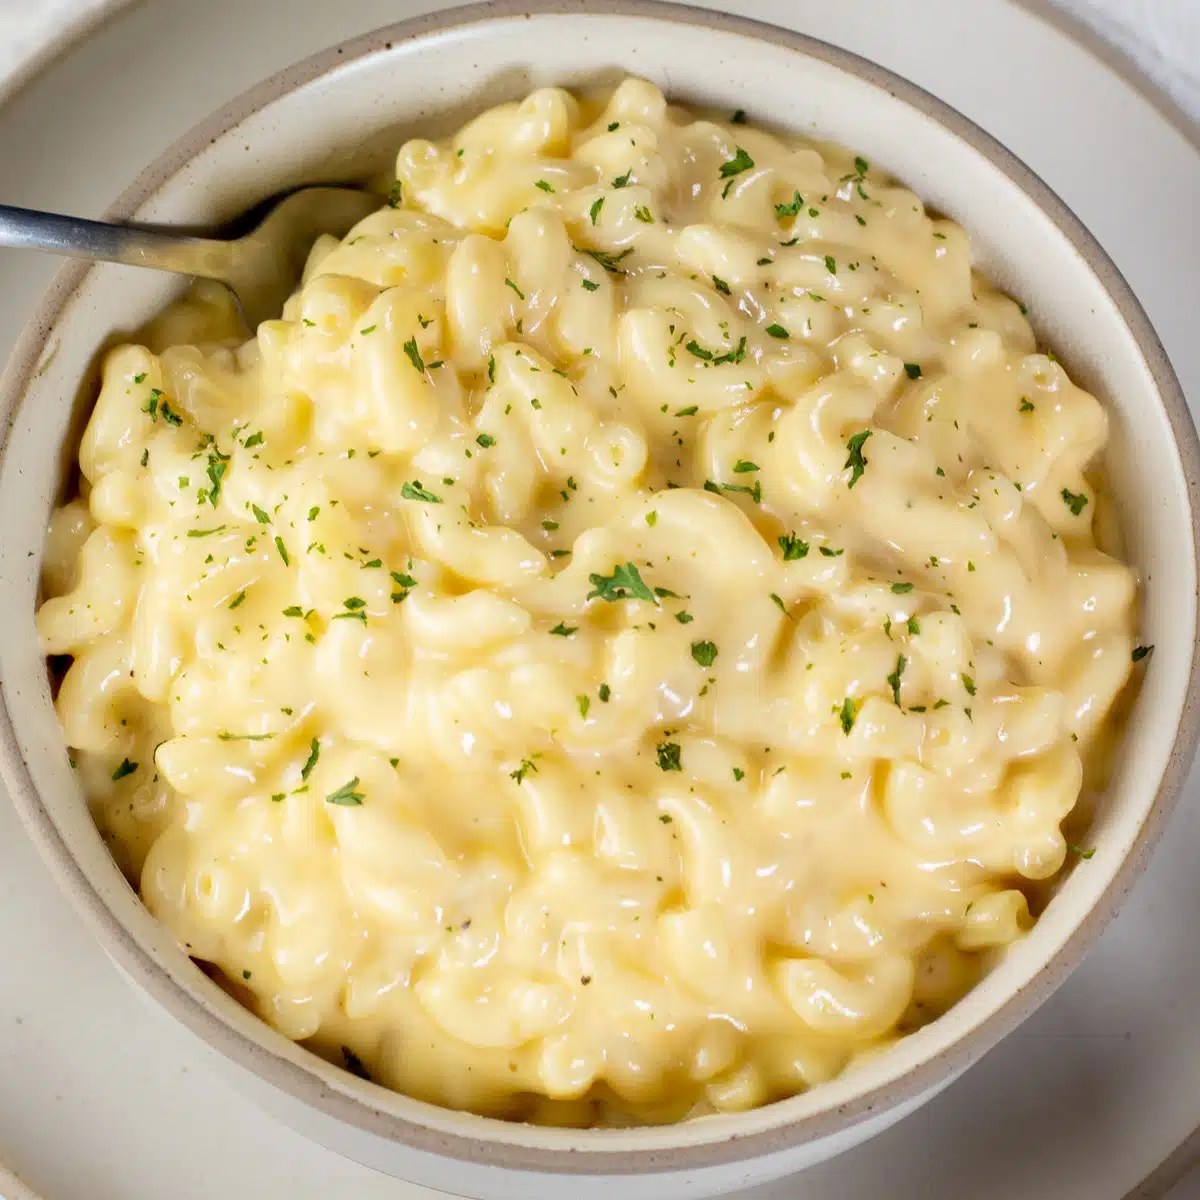 Square image of sour cream macaroni and cheese.